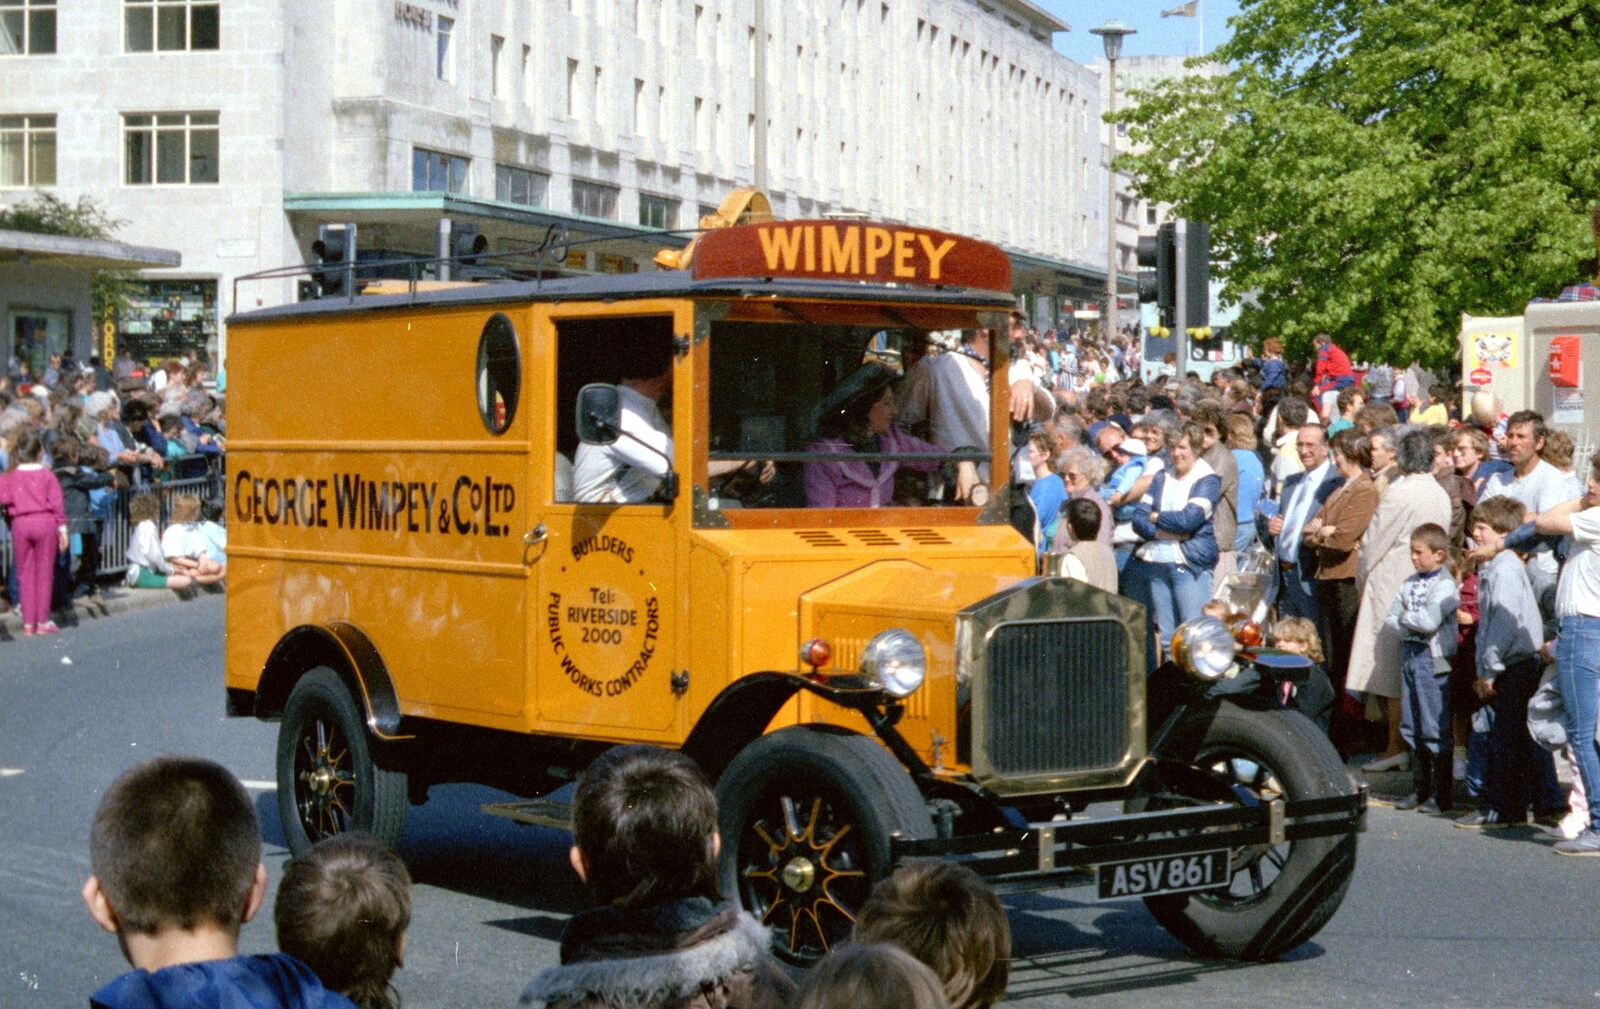 A George Wimpey van, as in builders, not burgers from Uni: The Lord Mayor's Procession, Plymouth, Devon - 21st May 1986